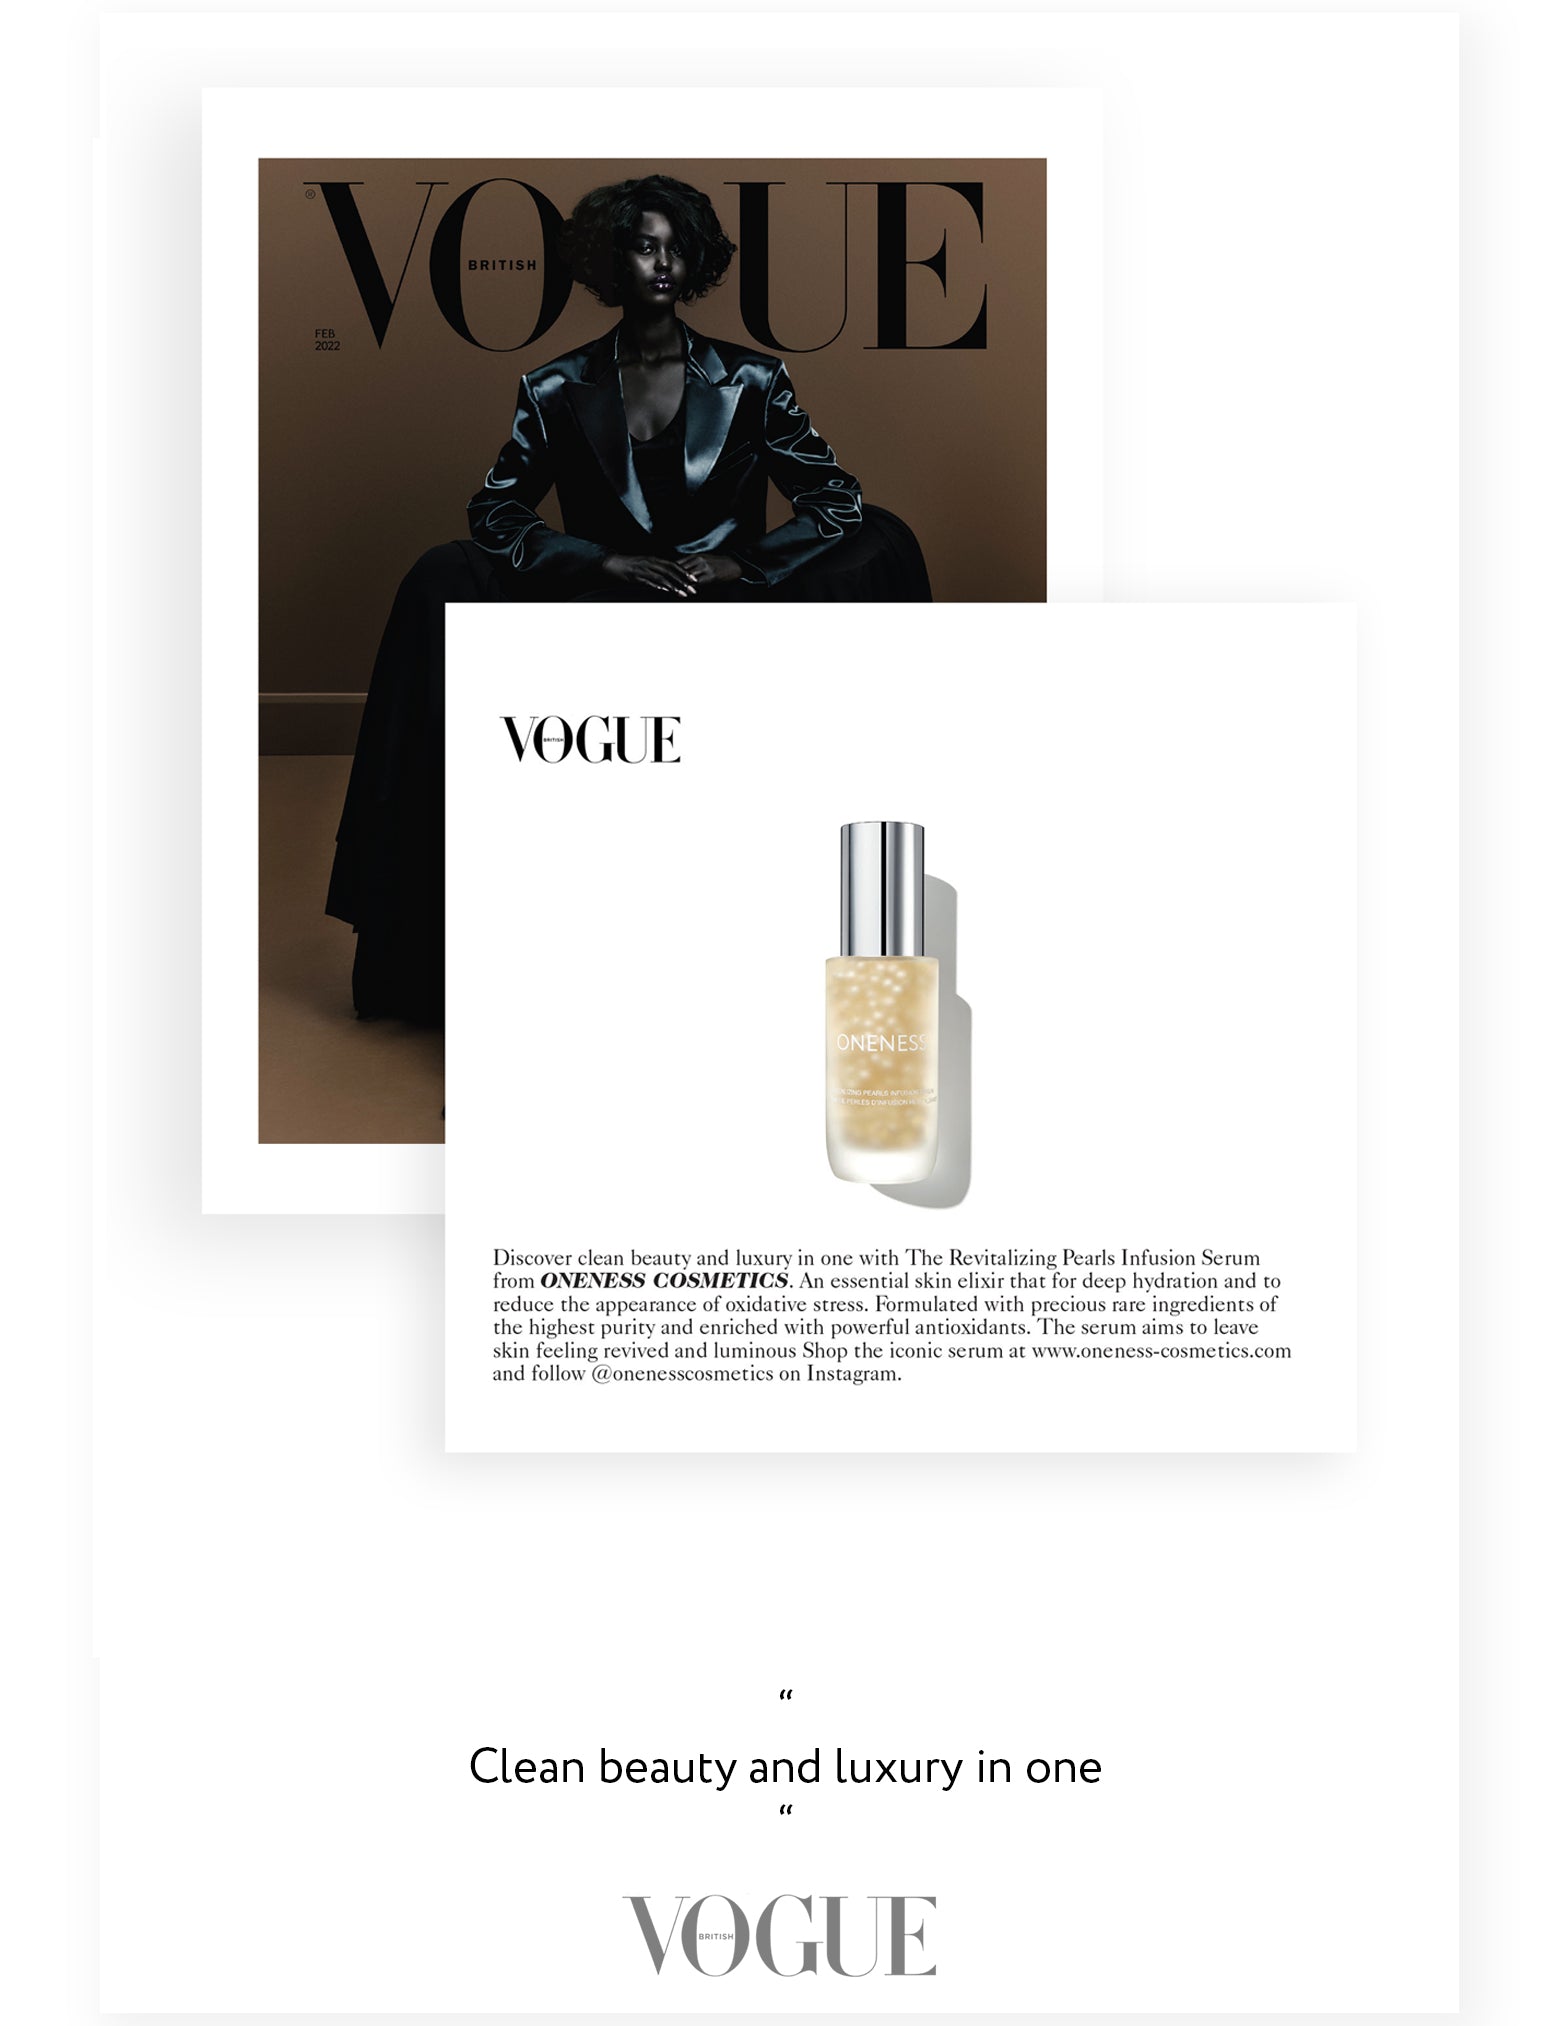 AS FEATURED IN VOGUE